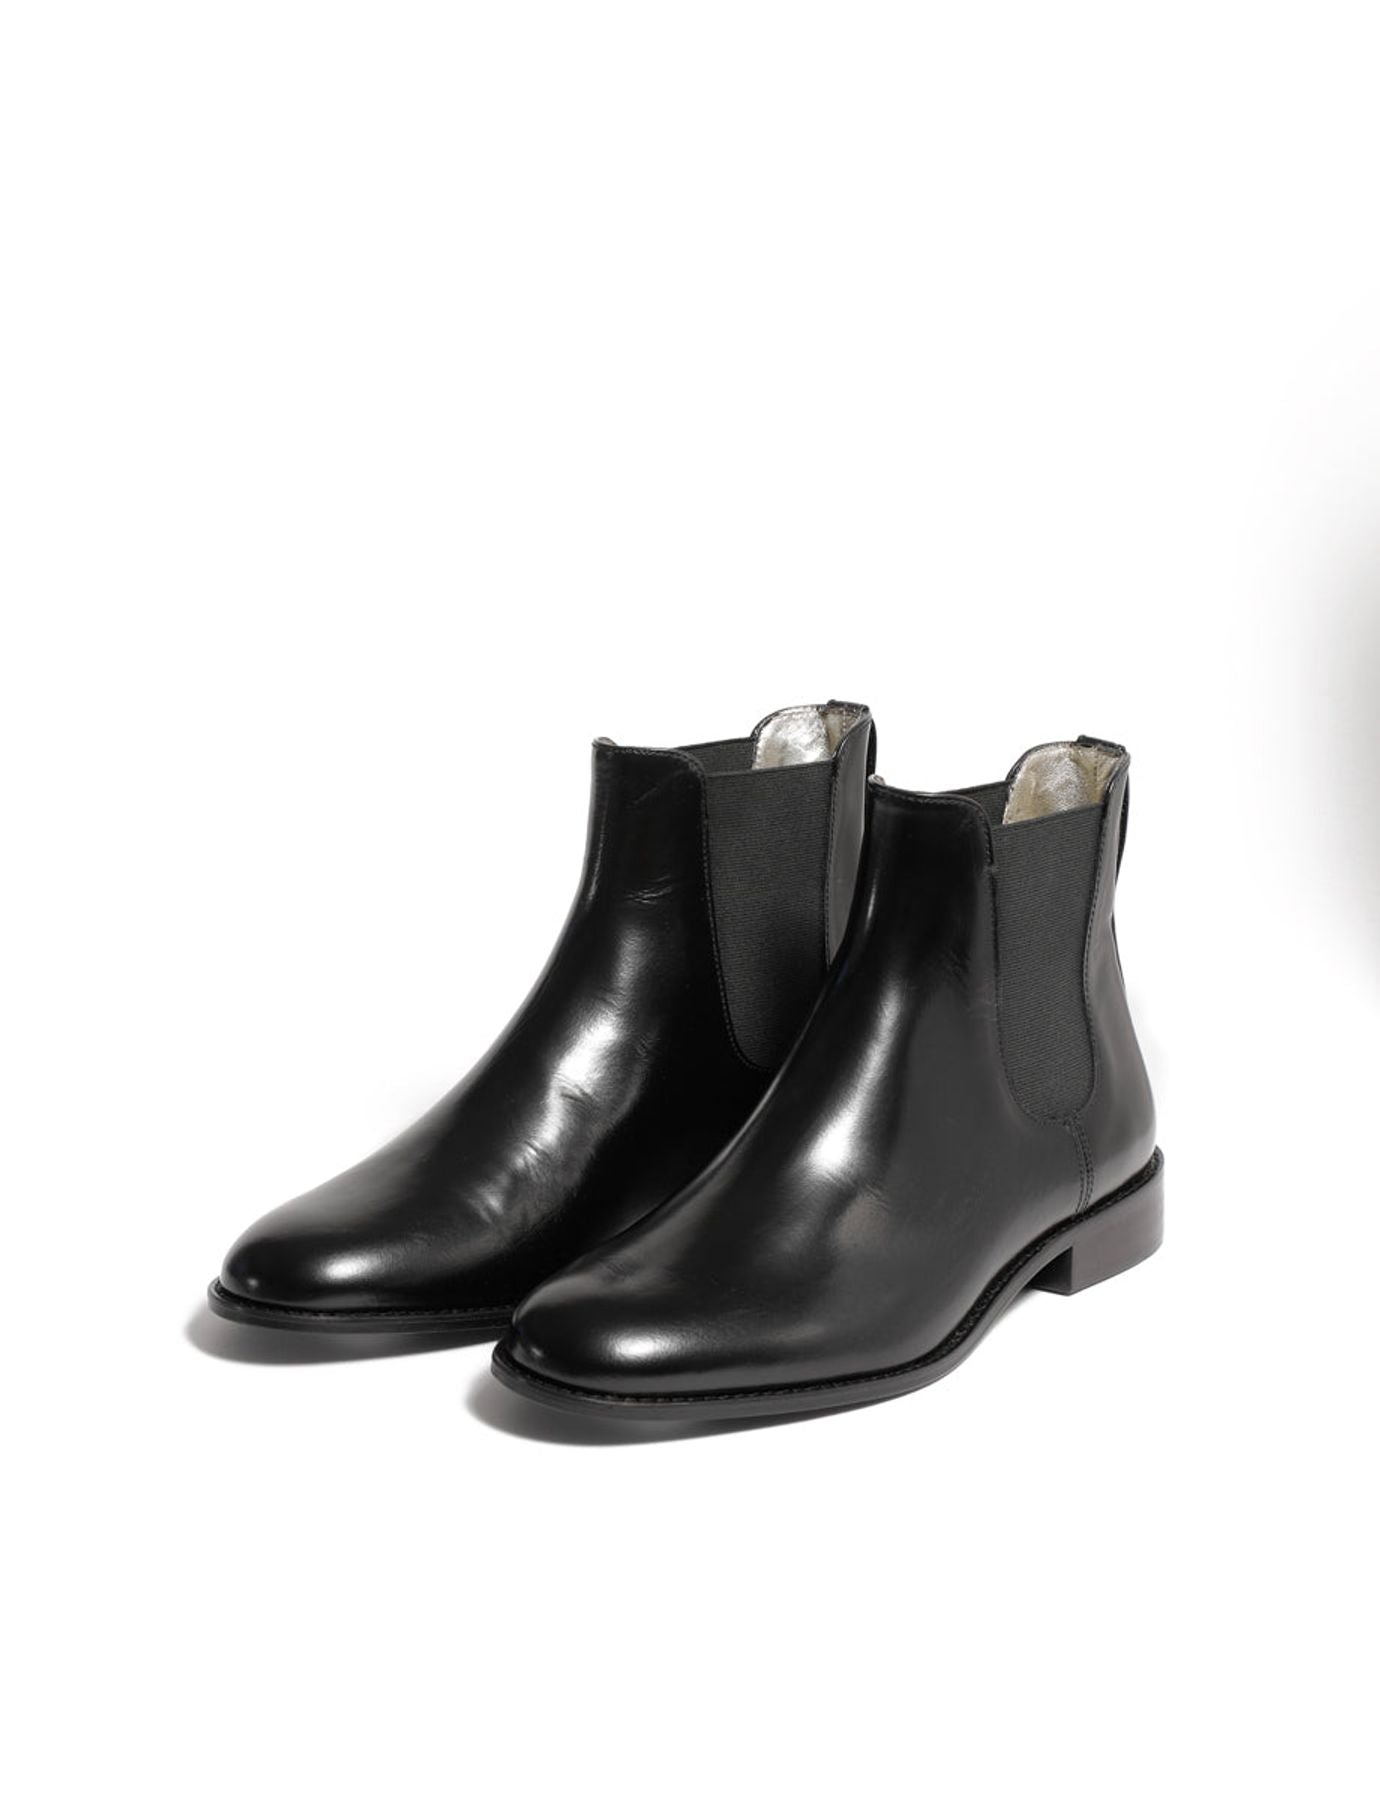 boots-chelsea-leather-black